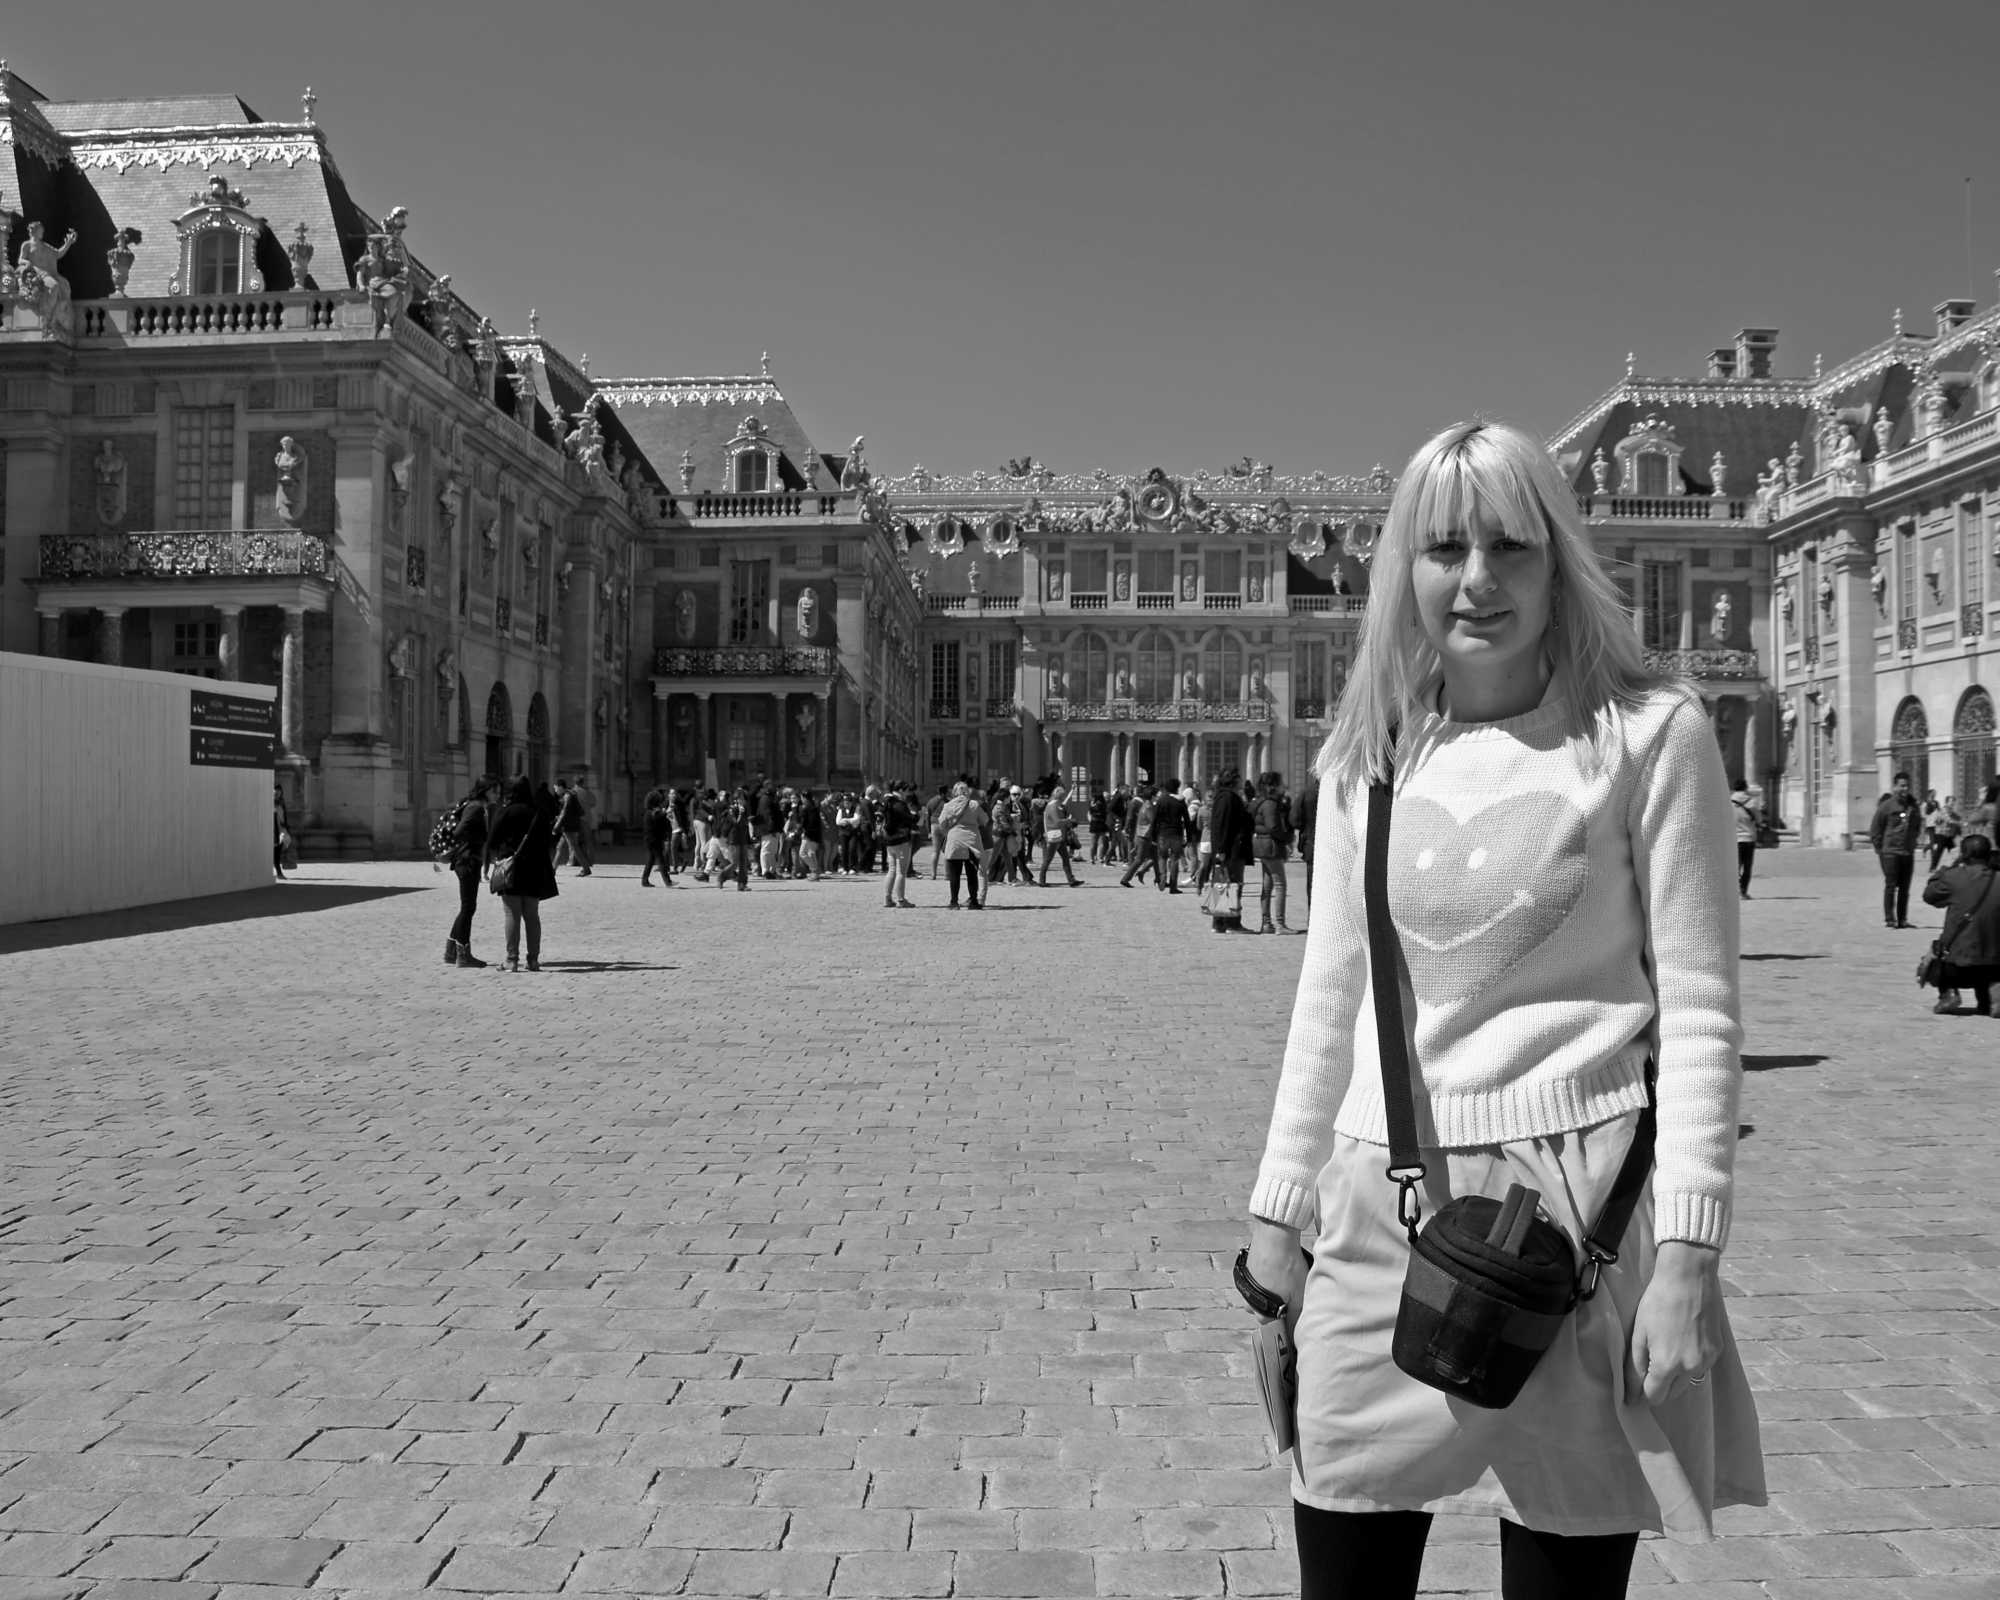 In front of the Palace